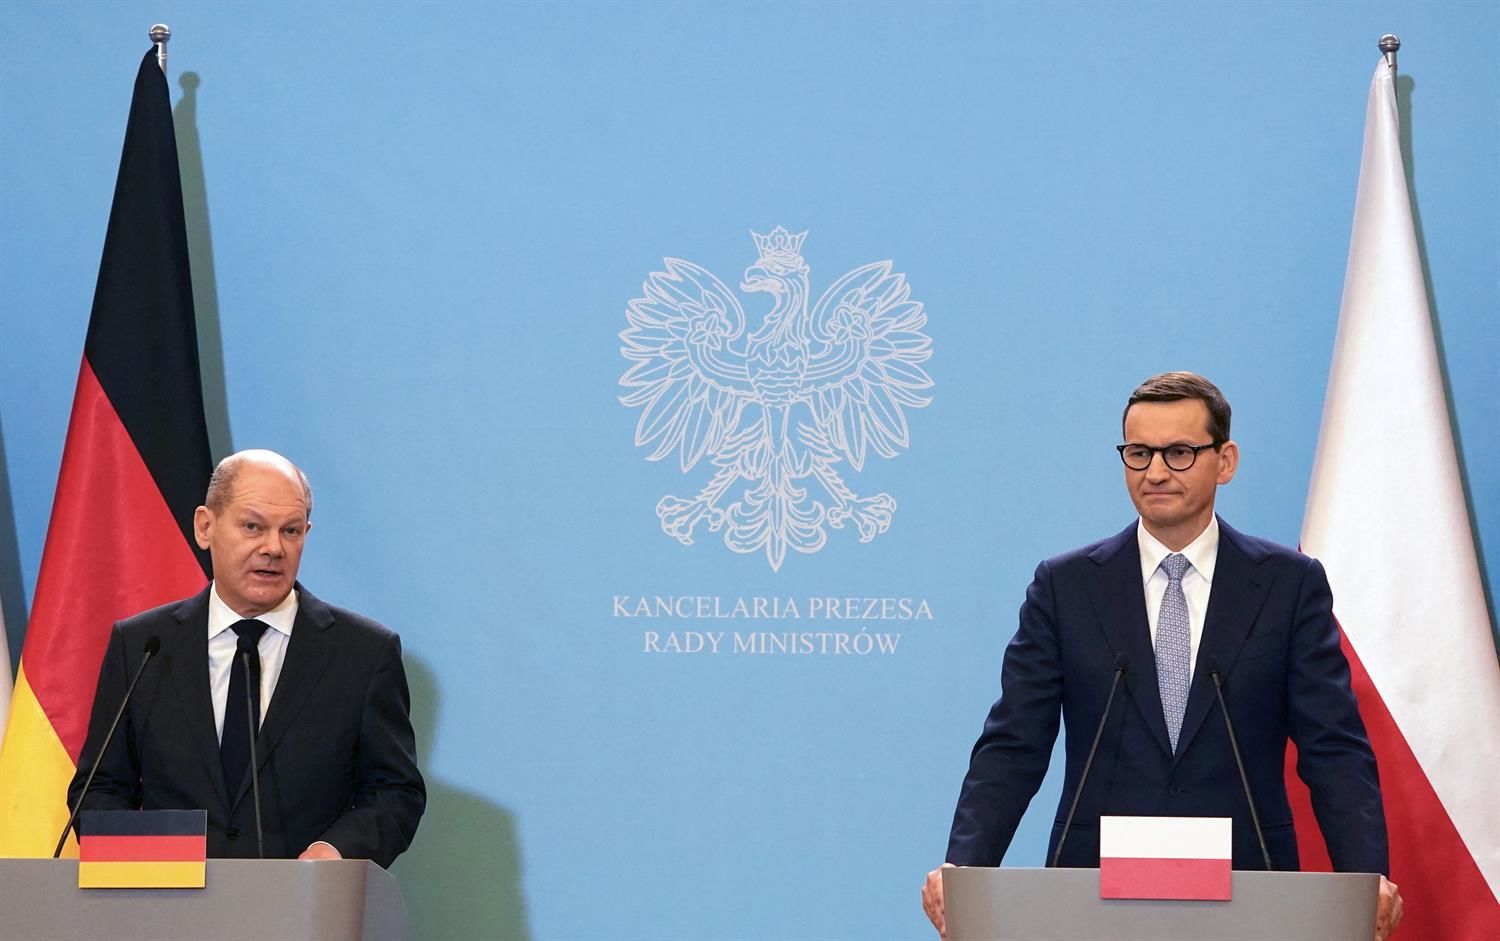 Poland demands repatriation payments from Germany relating to World War II